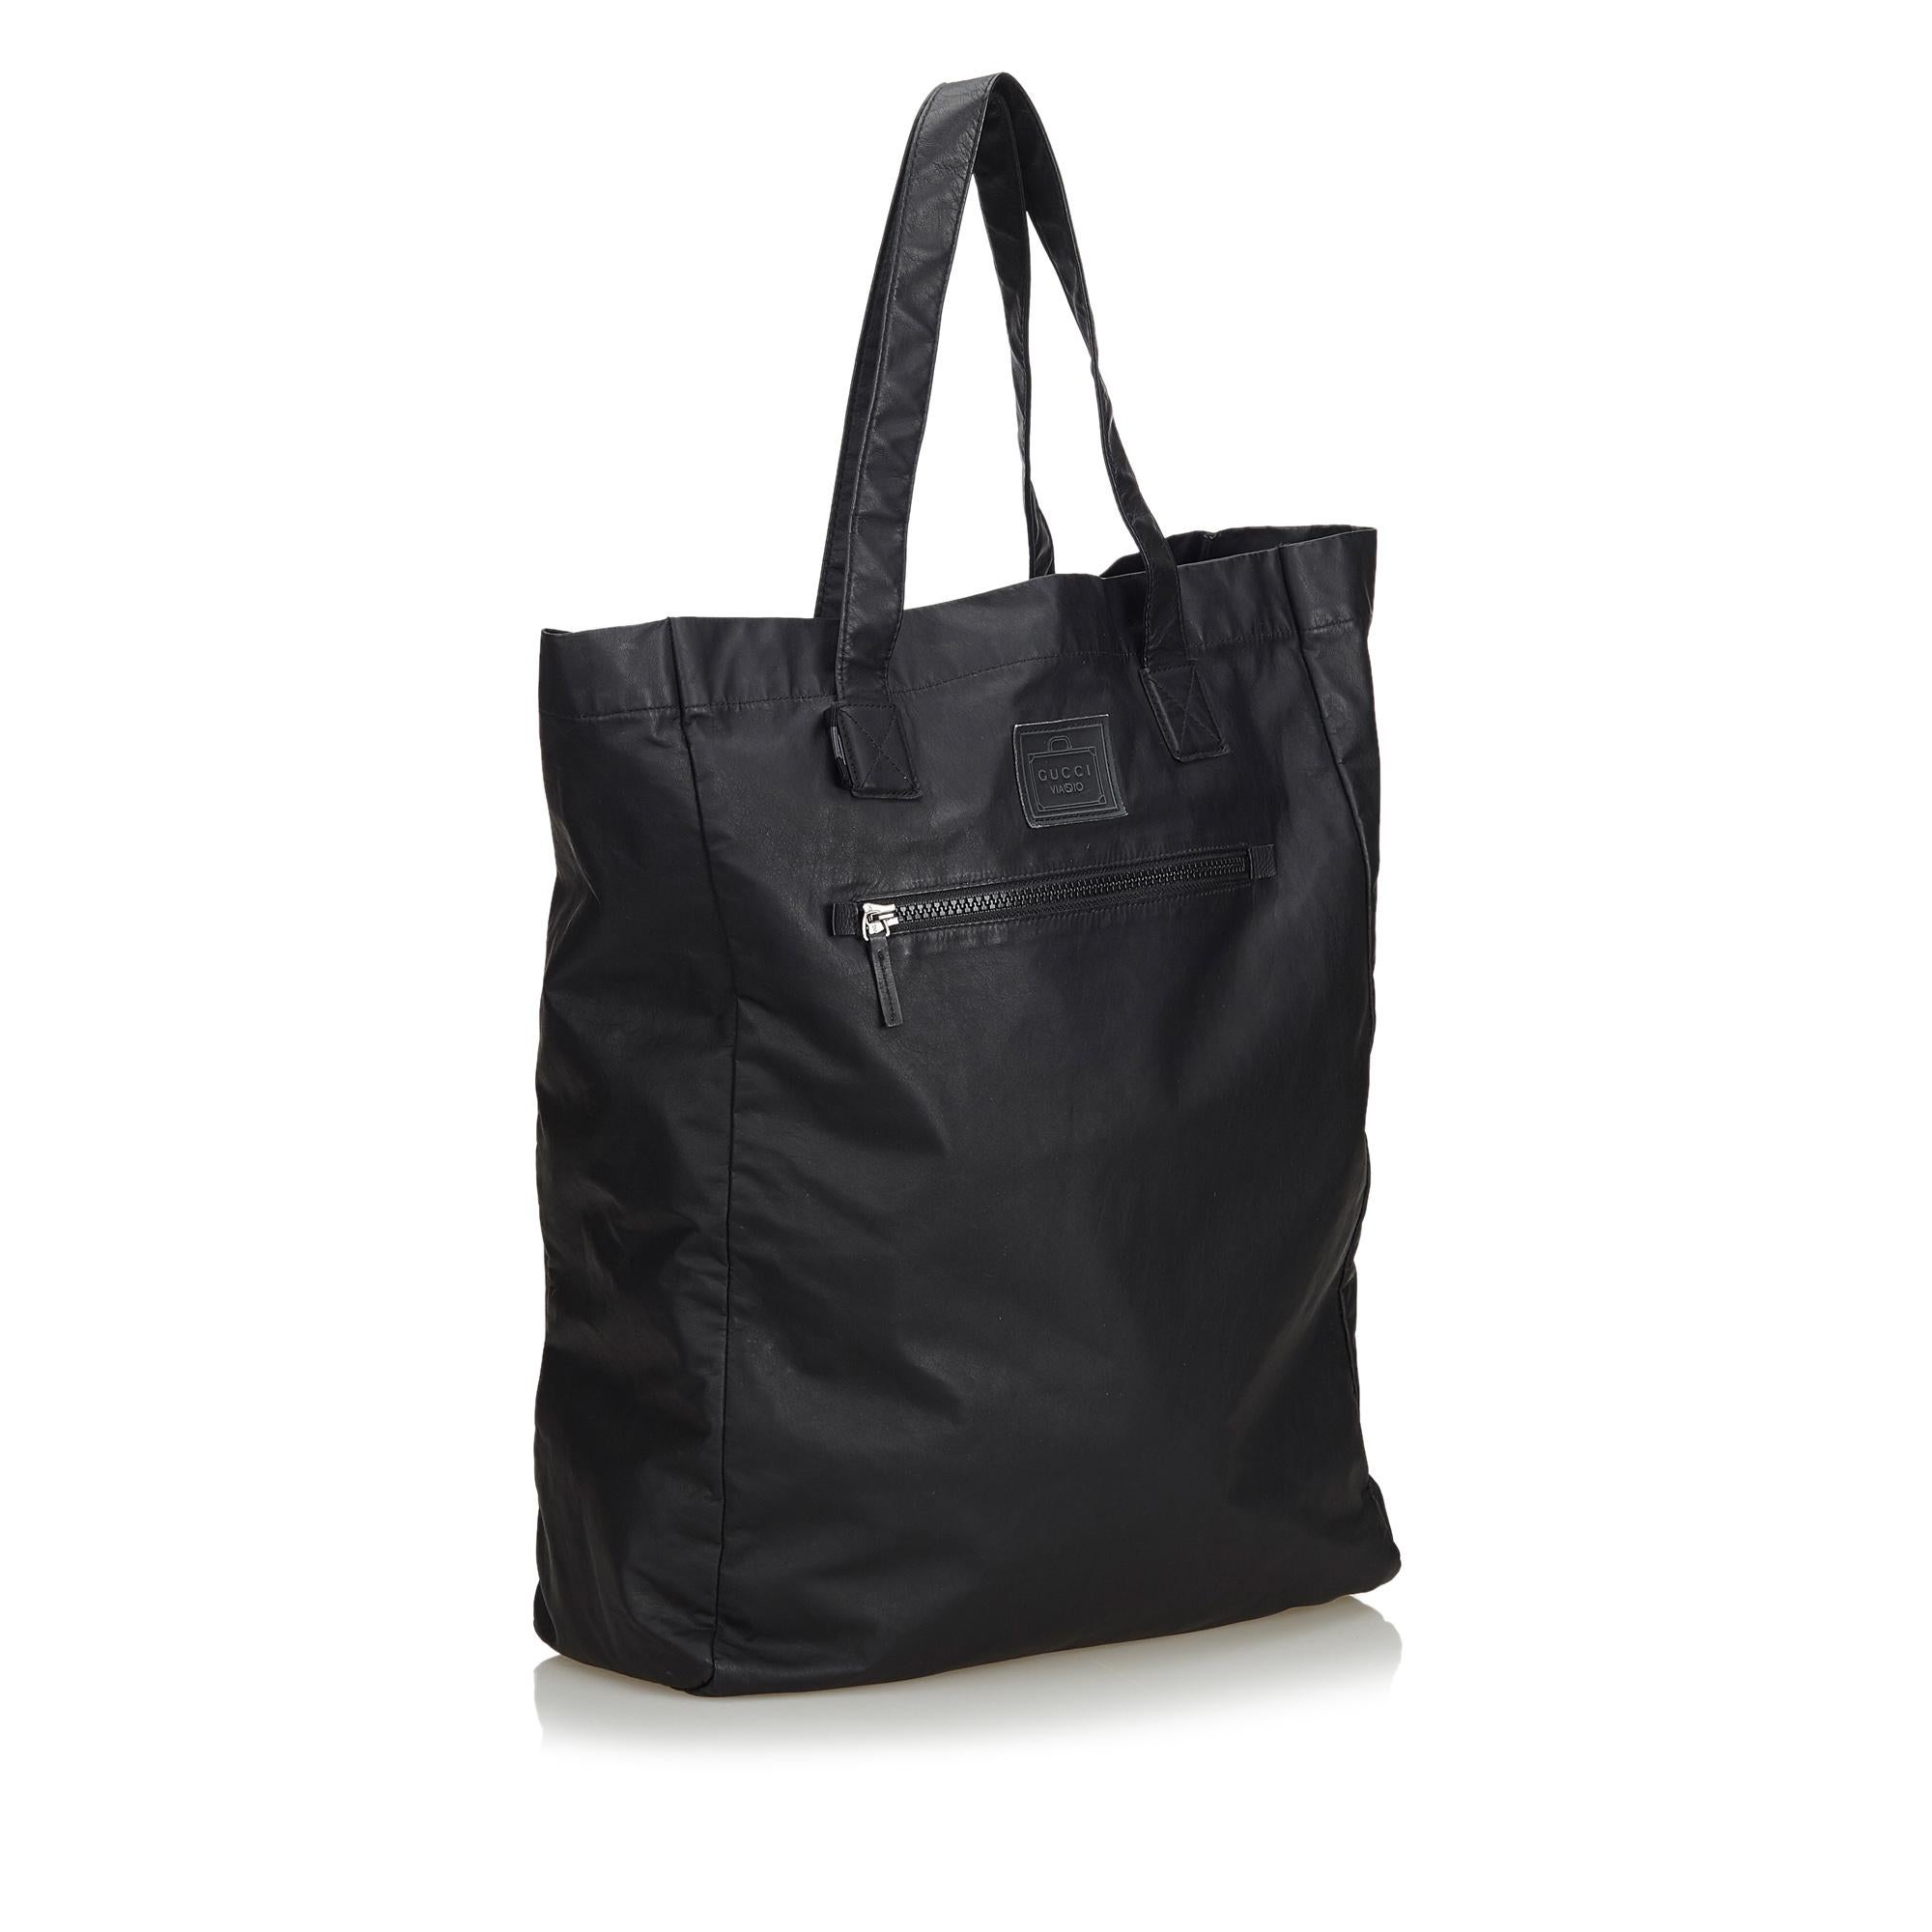 The Viaggio tote bag features a leather body, a front exterior zip pocket, flat leather handles, and an open top. It carries as B+ condition rating.

Inclusions: 
This item does not come with inclusions.

Dimensions:
Length: 42.00 cm
Width: 32.00